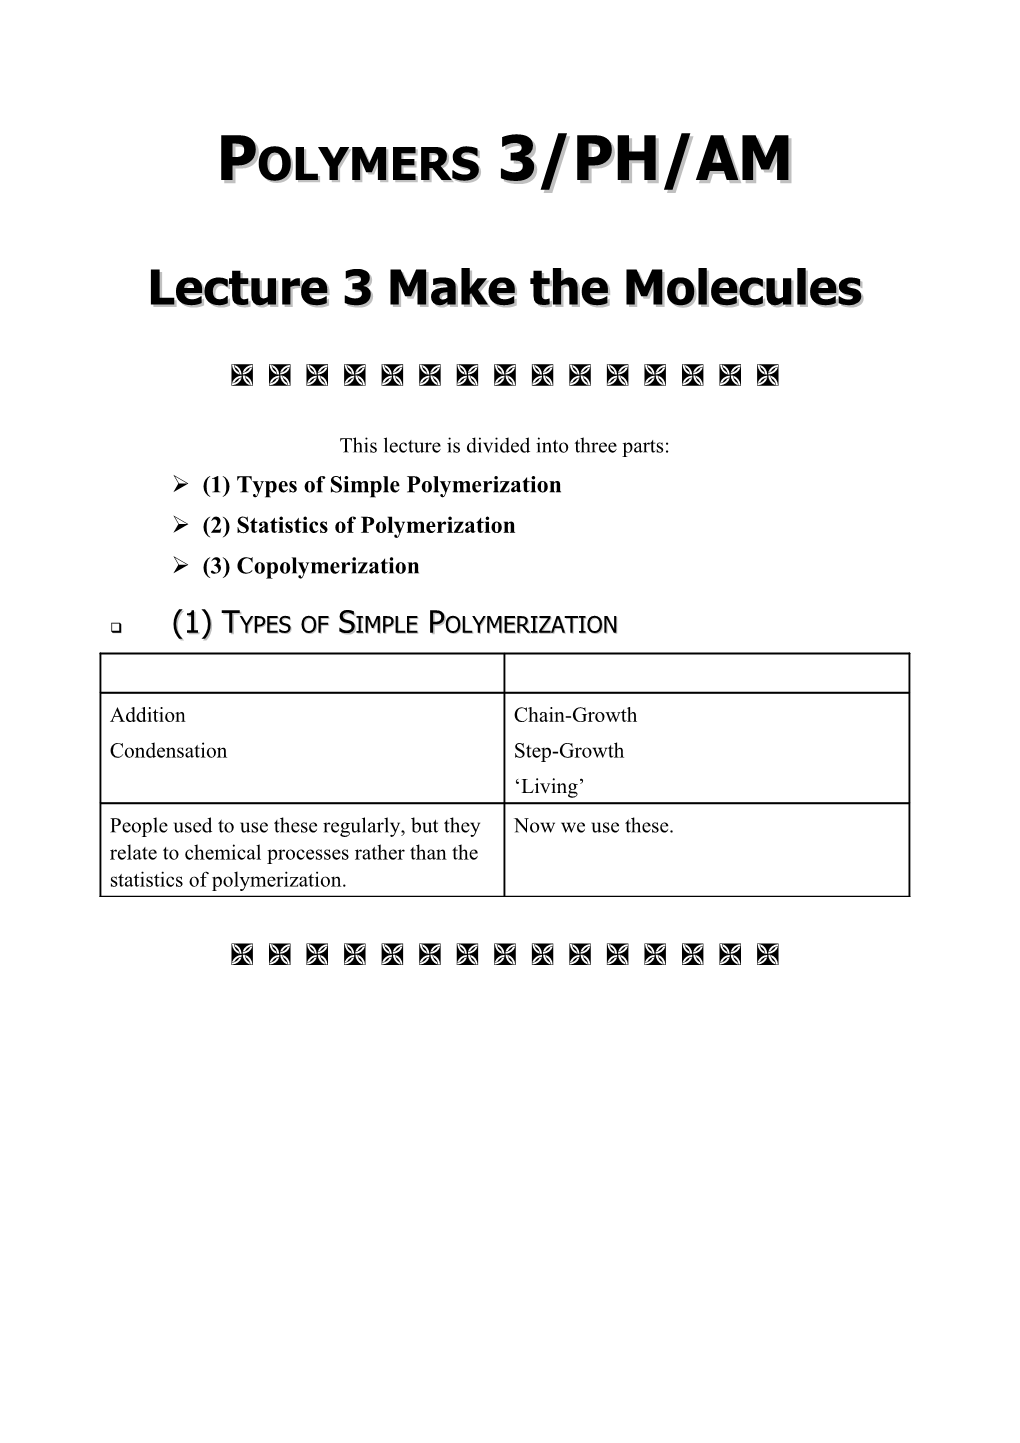 Lecture 3 Make the Molecules